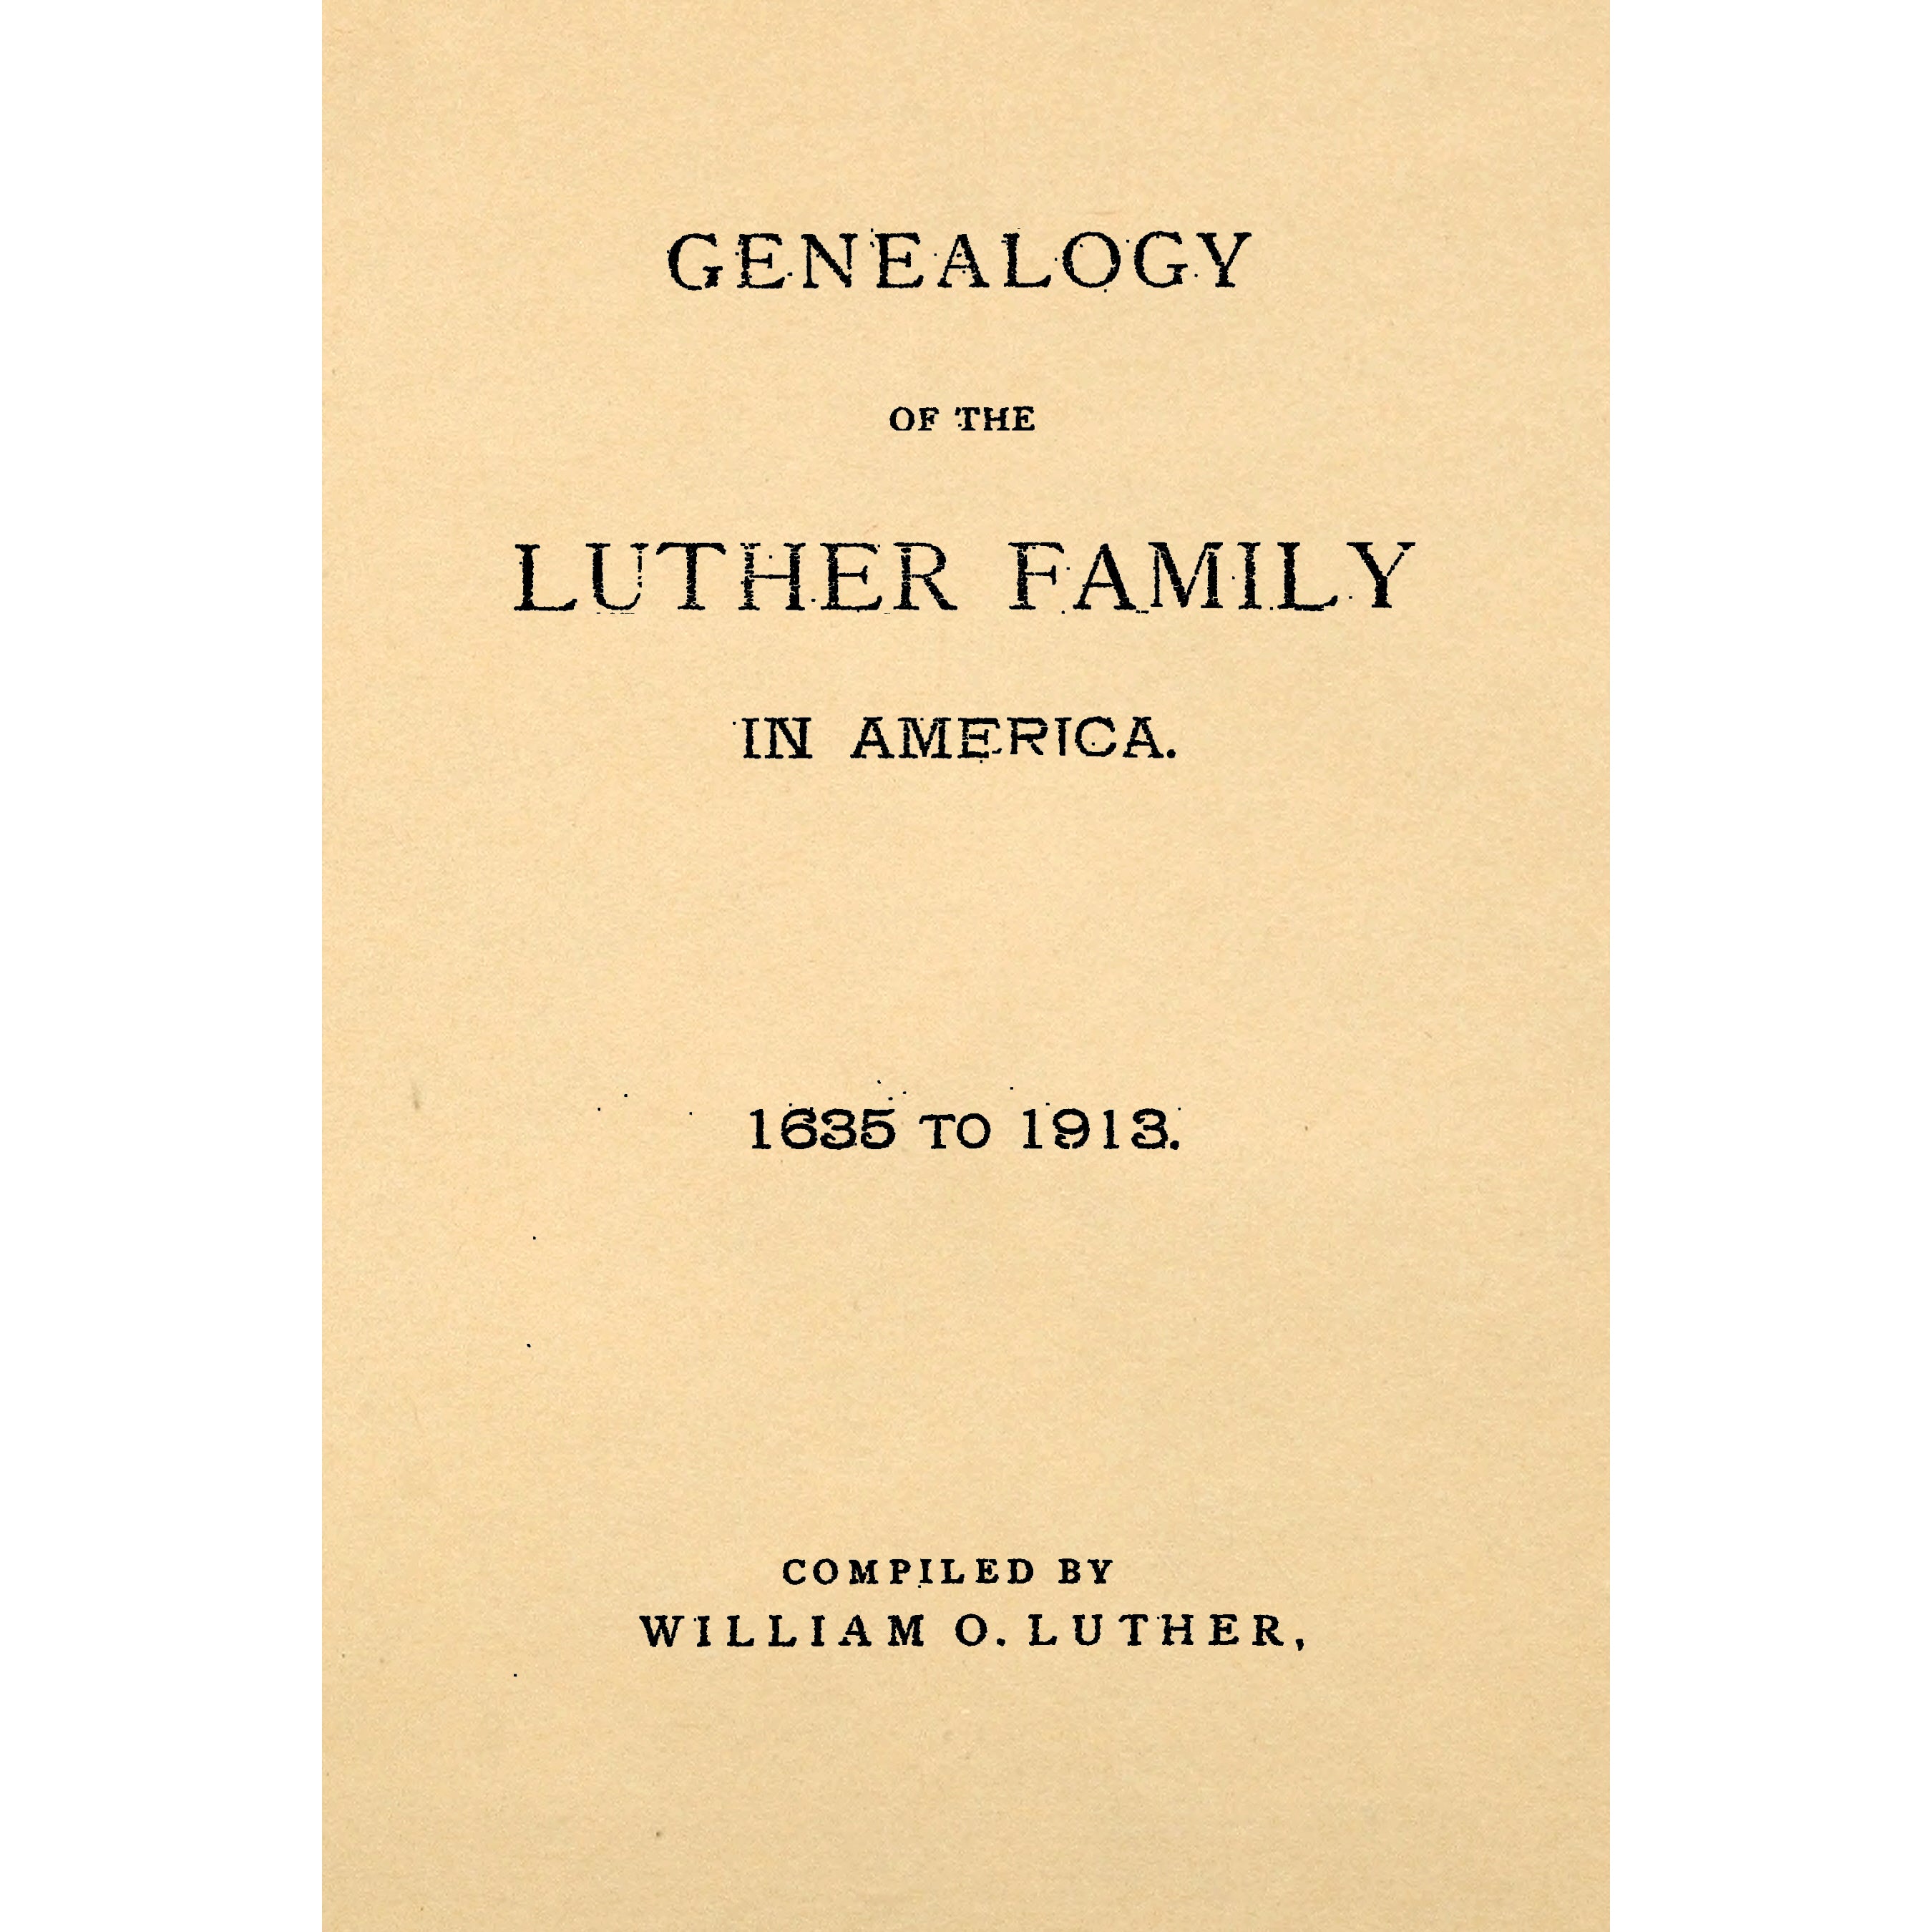 Genealogy of the Luther Family in America 1635 to 1913